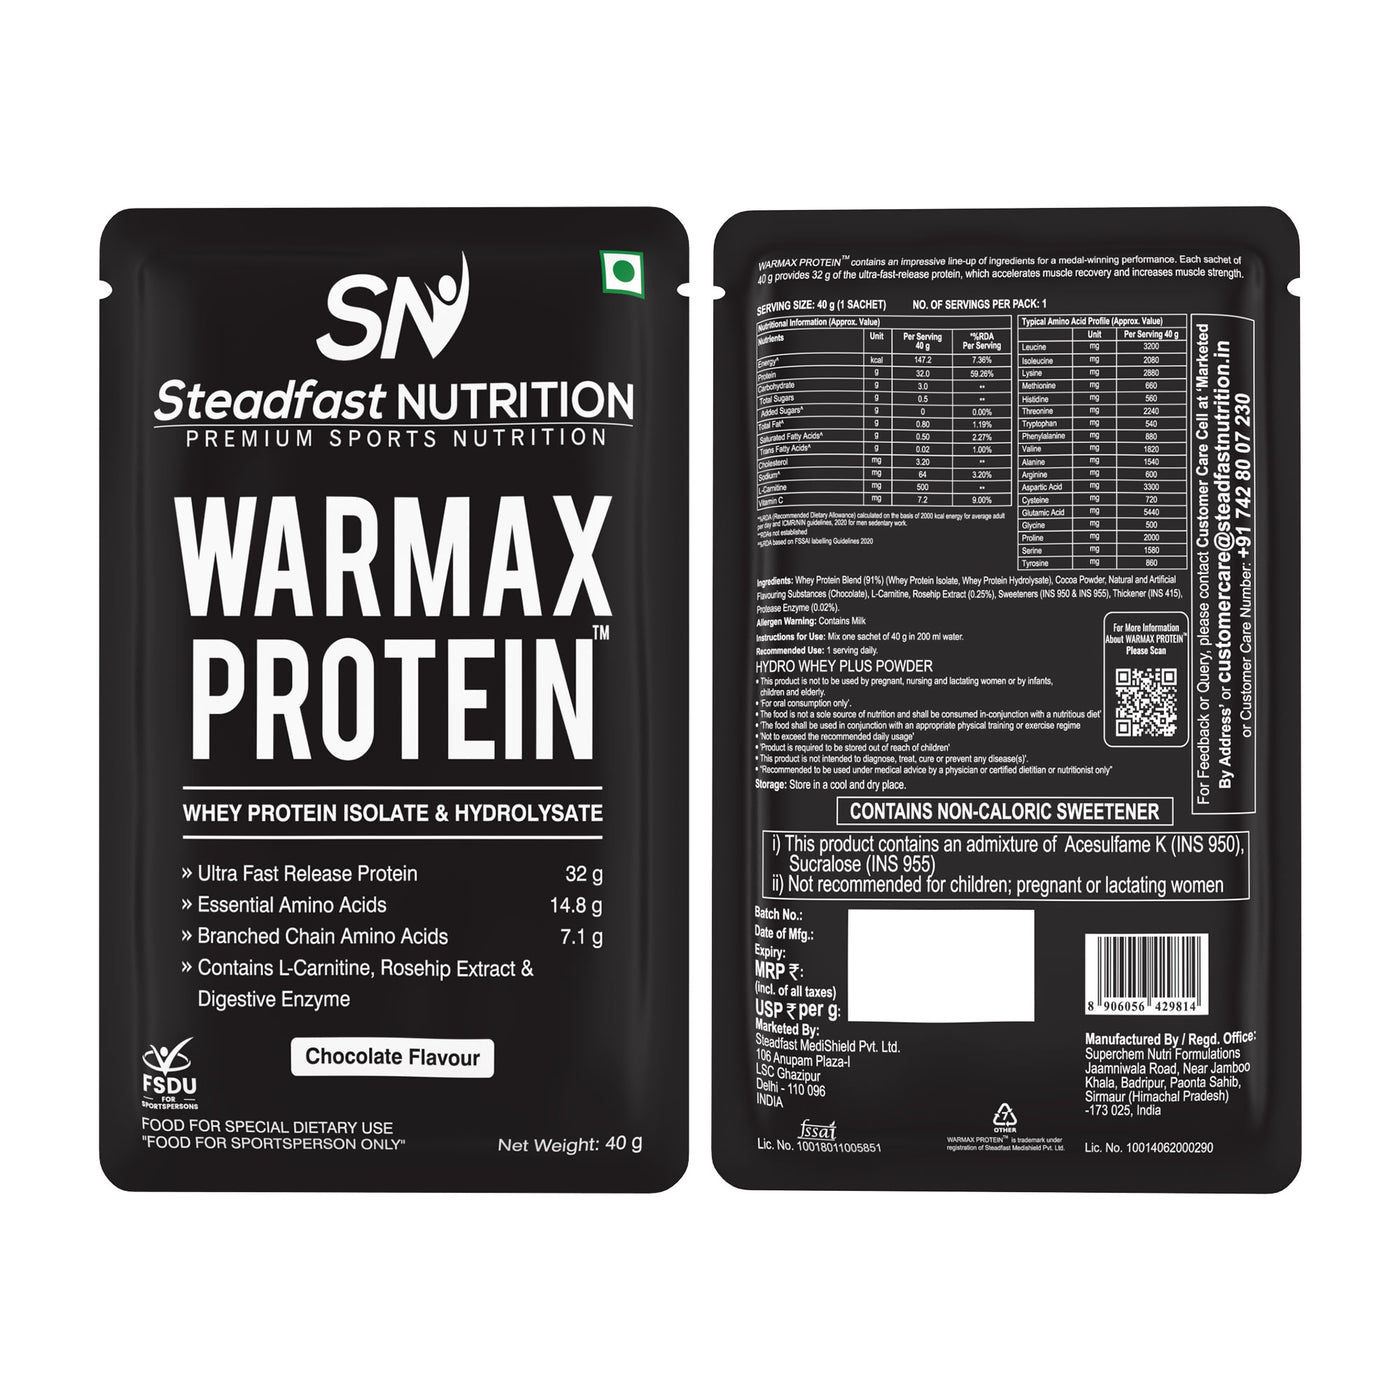 Warmax Front and Back Sachets